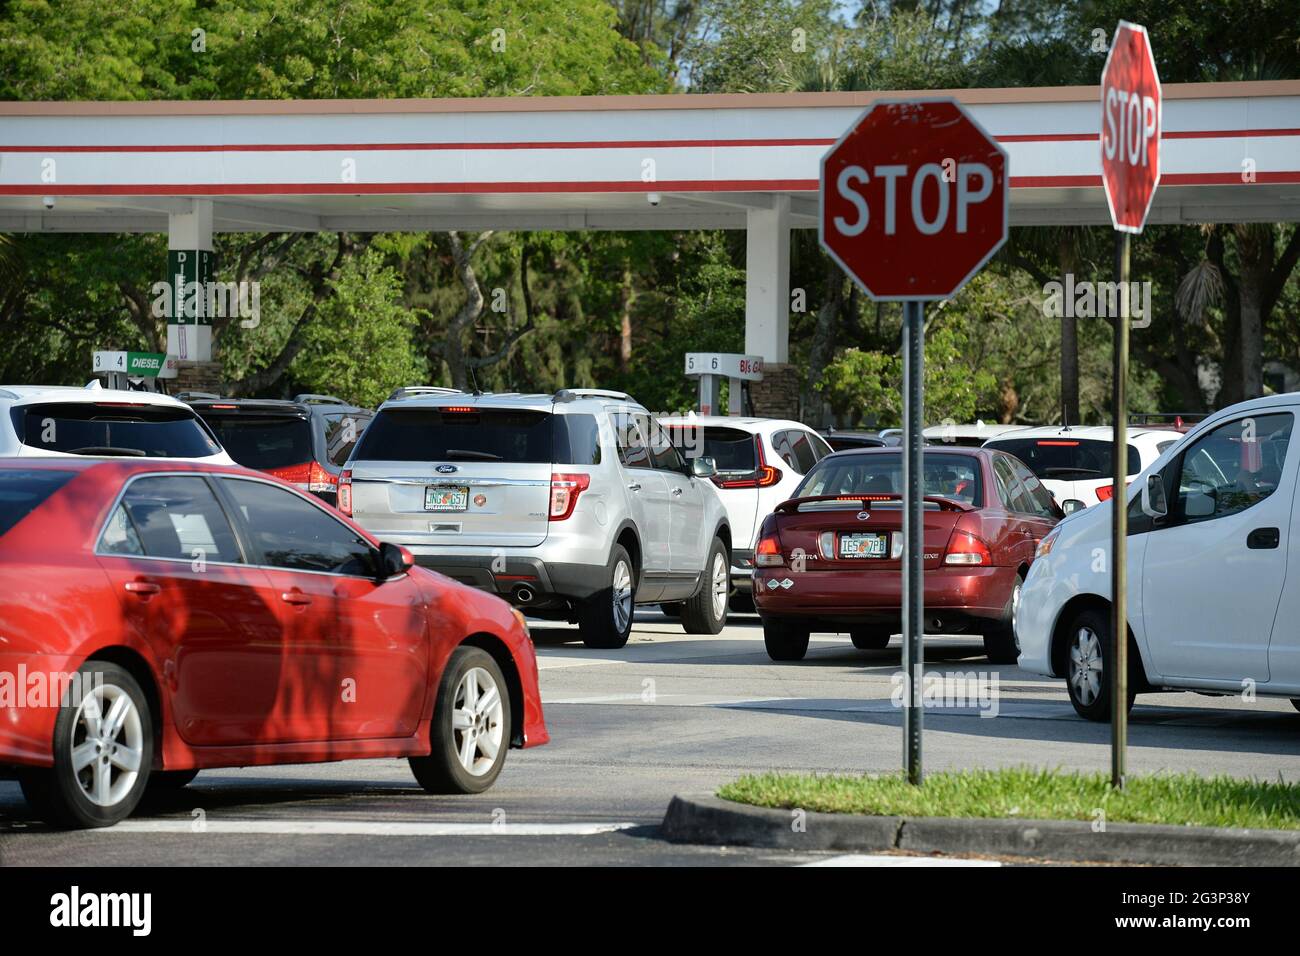 Miami - FL - 20210512 A general view as people wait in long lines at BJ's Gas Station after word spread about possible shortages due to a pipeline shut down to the east coast. Florida is not affected by the shut down as most of the fuel is received by ship at the port.  -PICTURED: Atmosphere Stock Photo